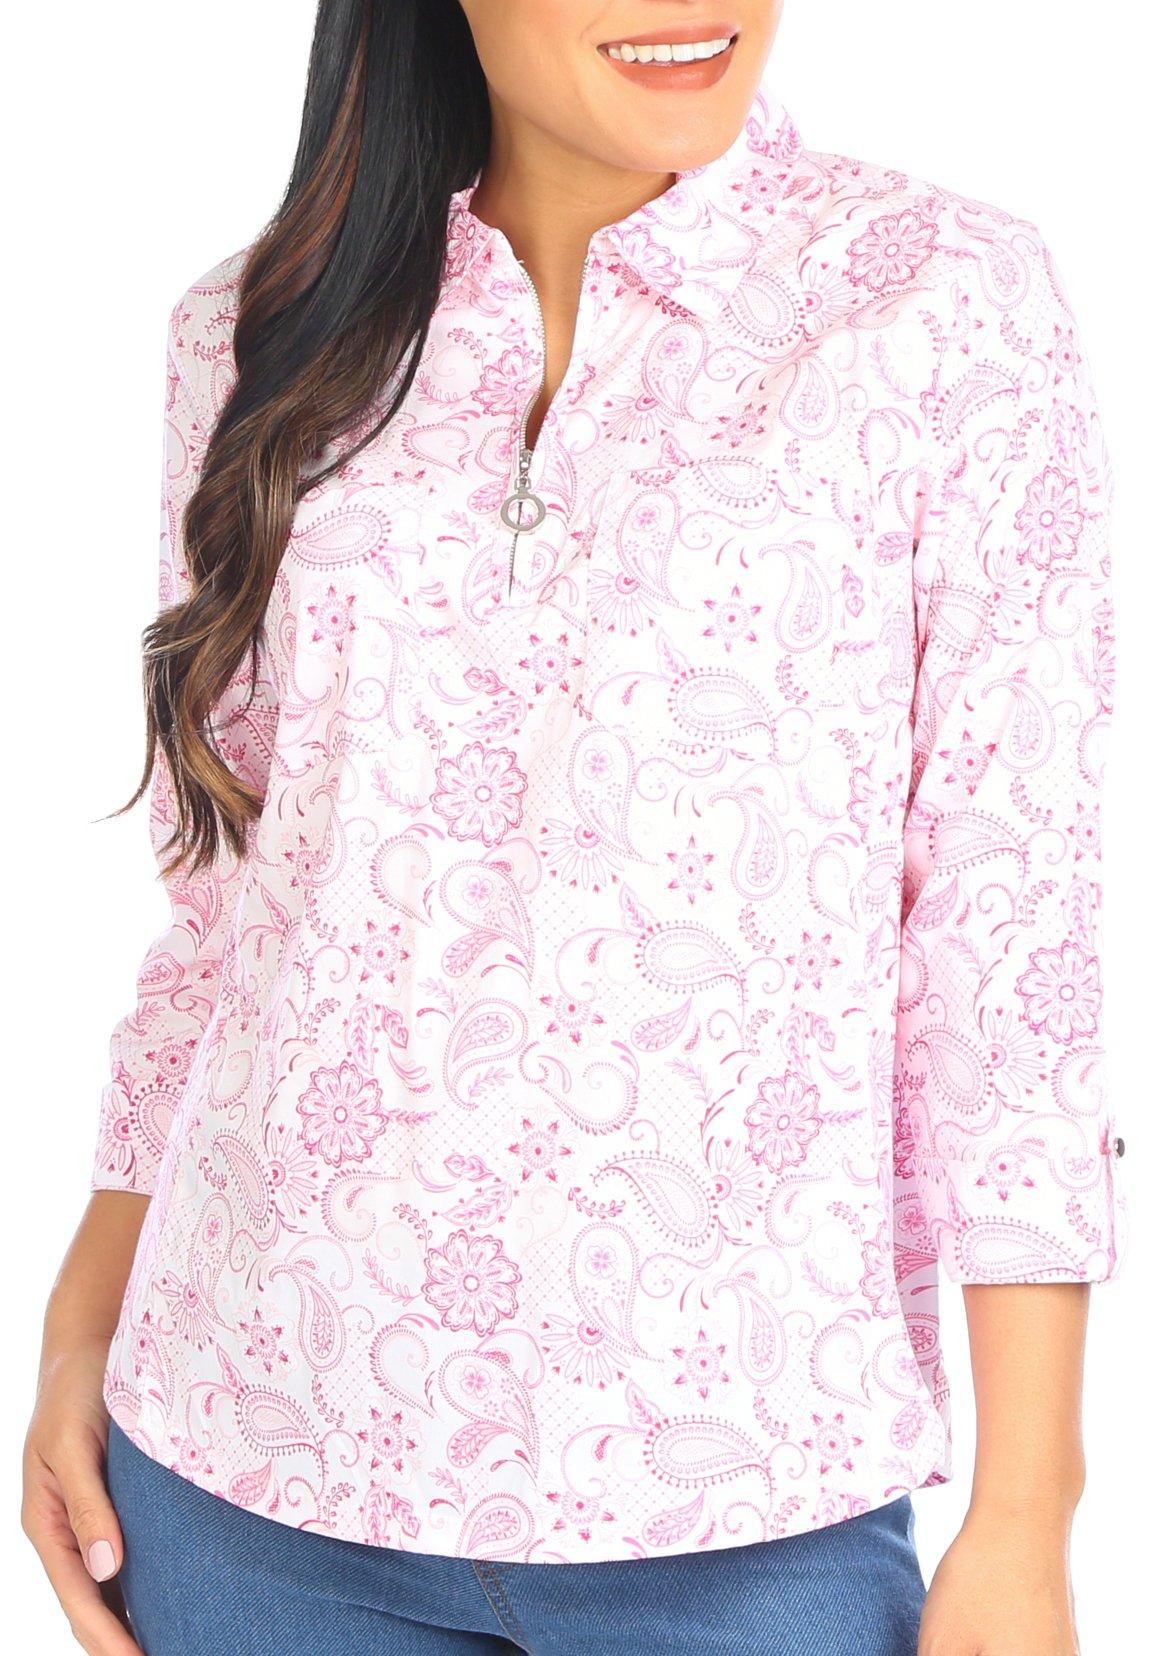 Coral Bay Womens Floral Print Knit To Fit